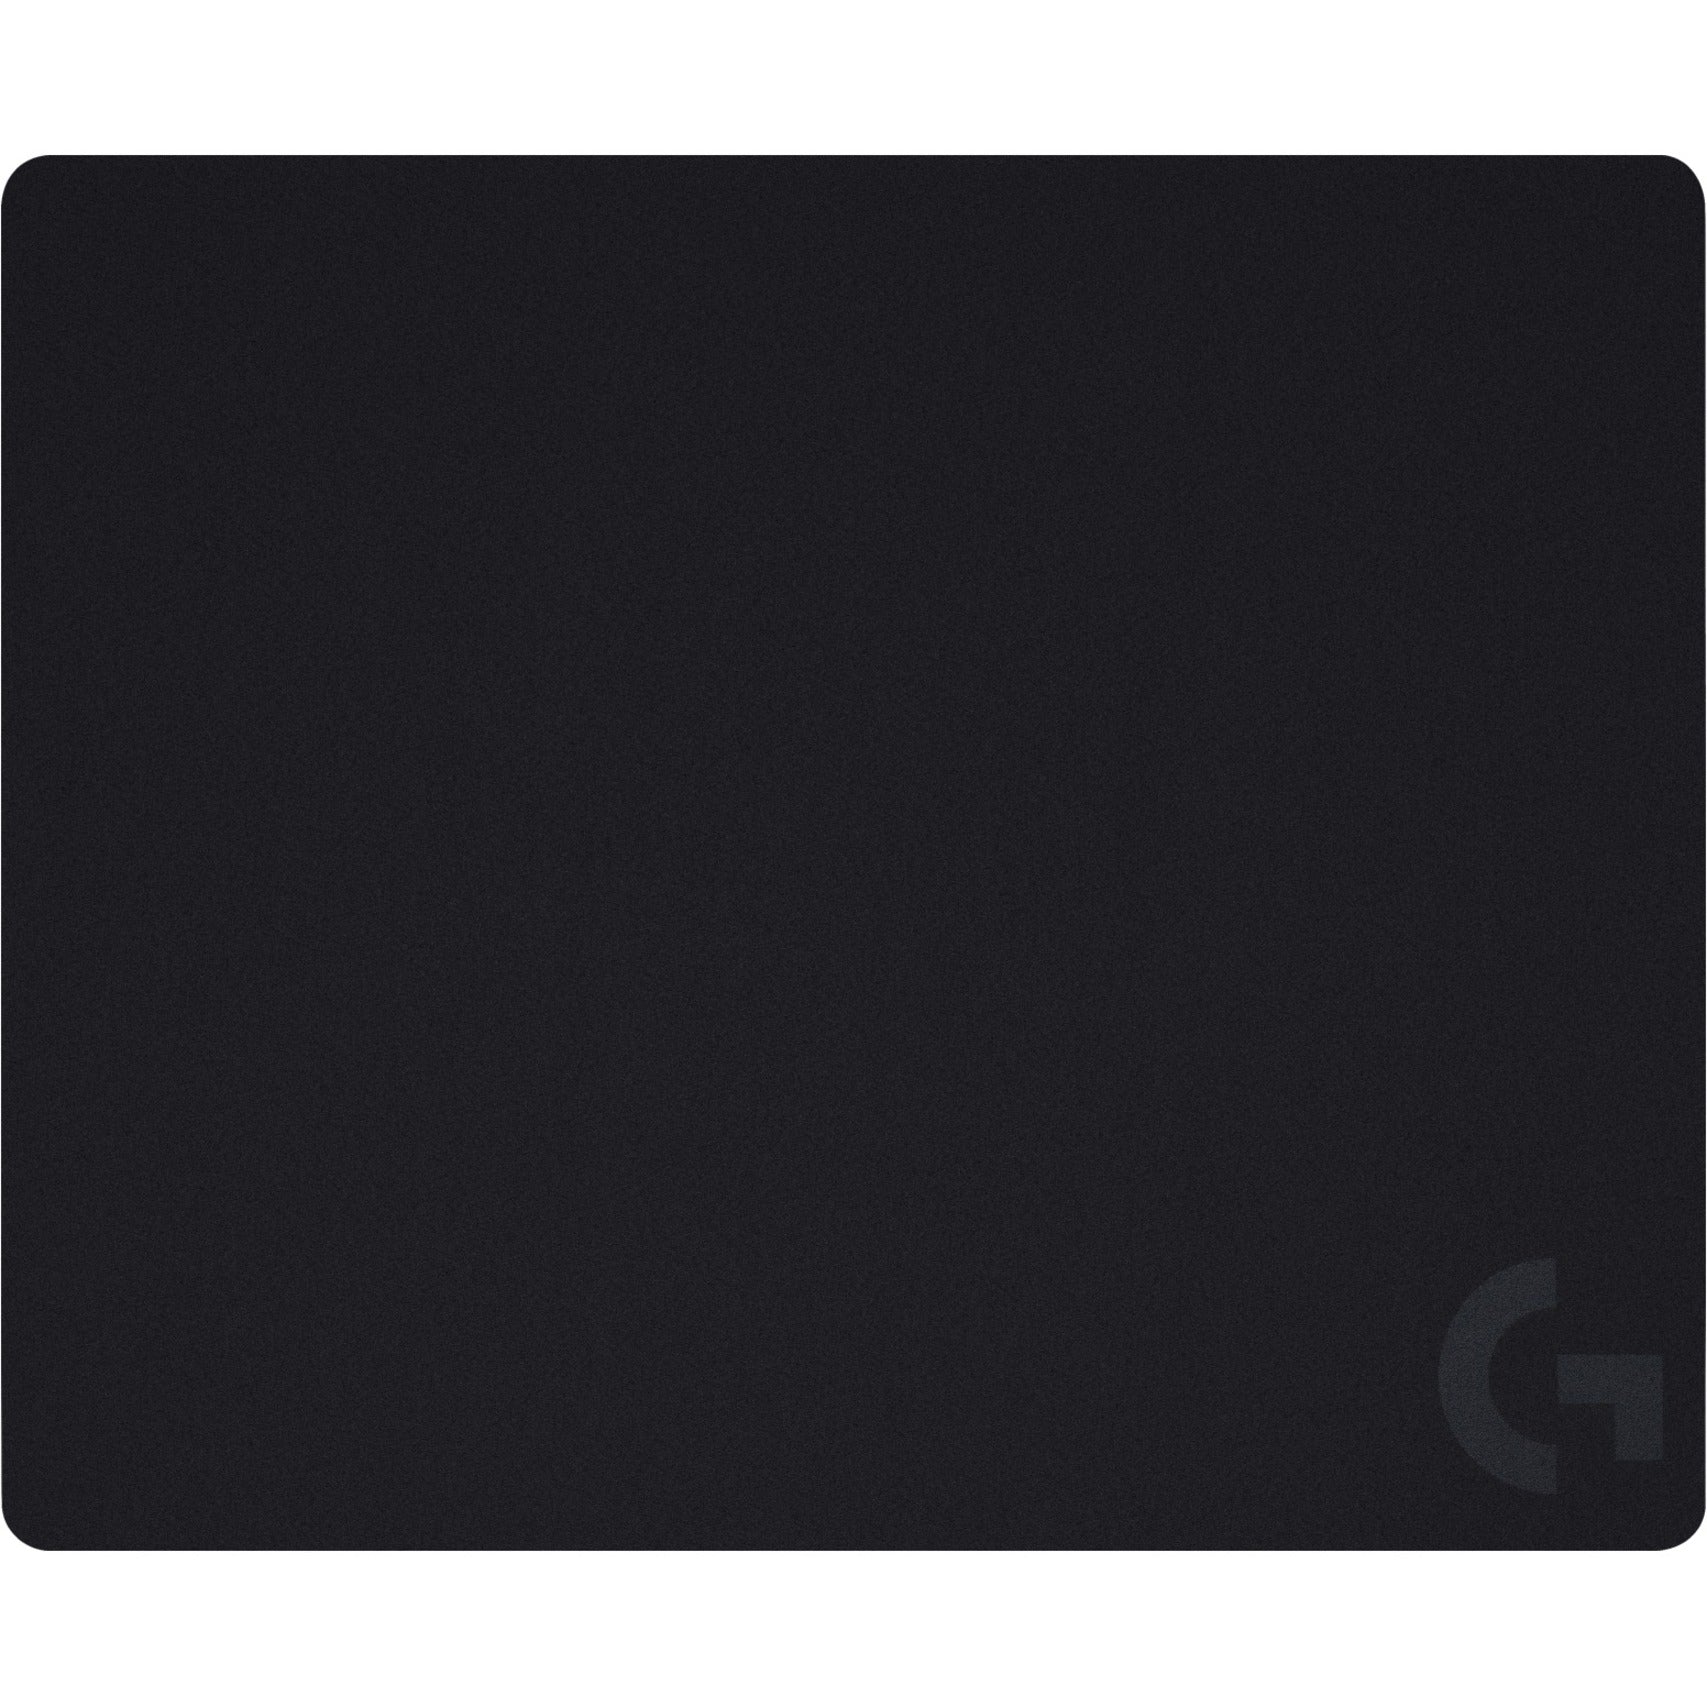 Logitech G 943-000790 Hard Gaming Mouse Pad, Smooth Surface for Precise Mouse Control